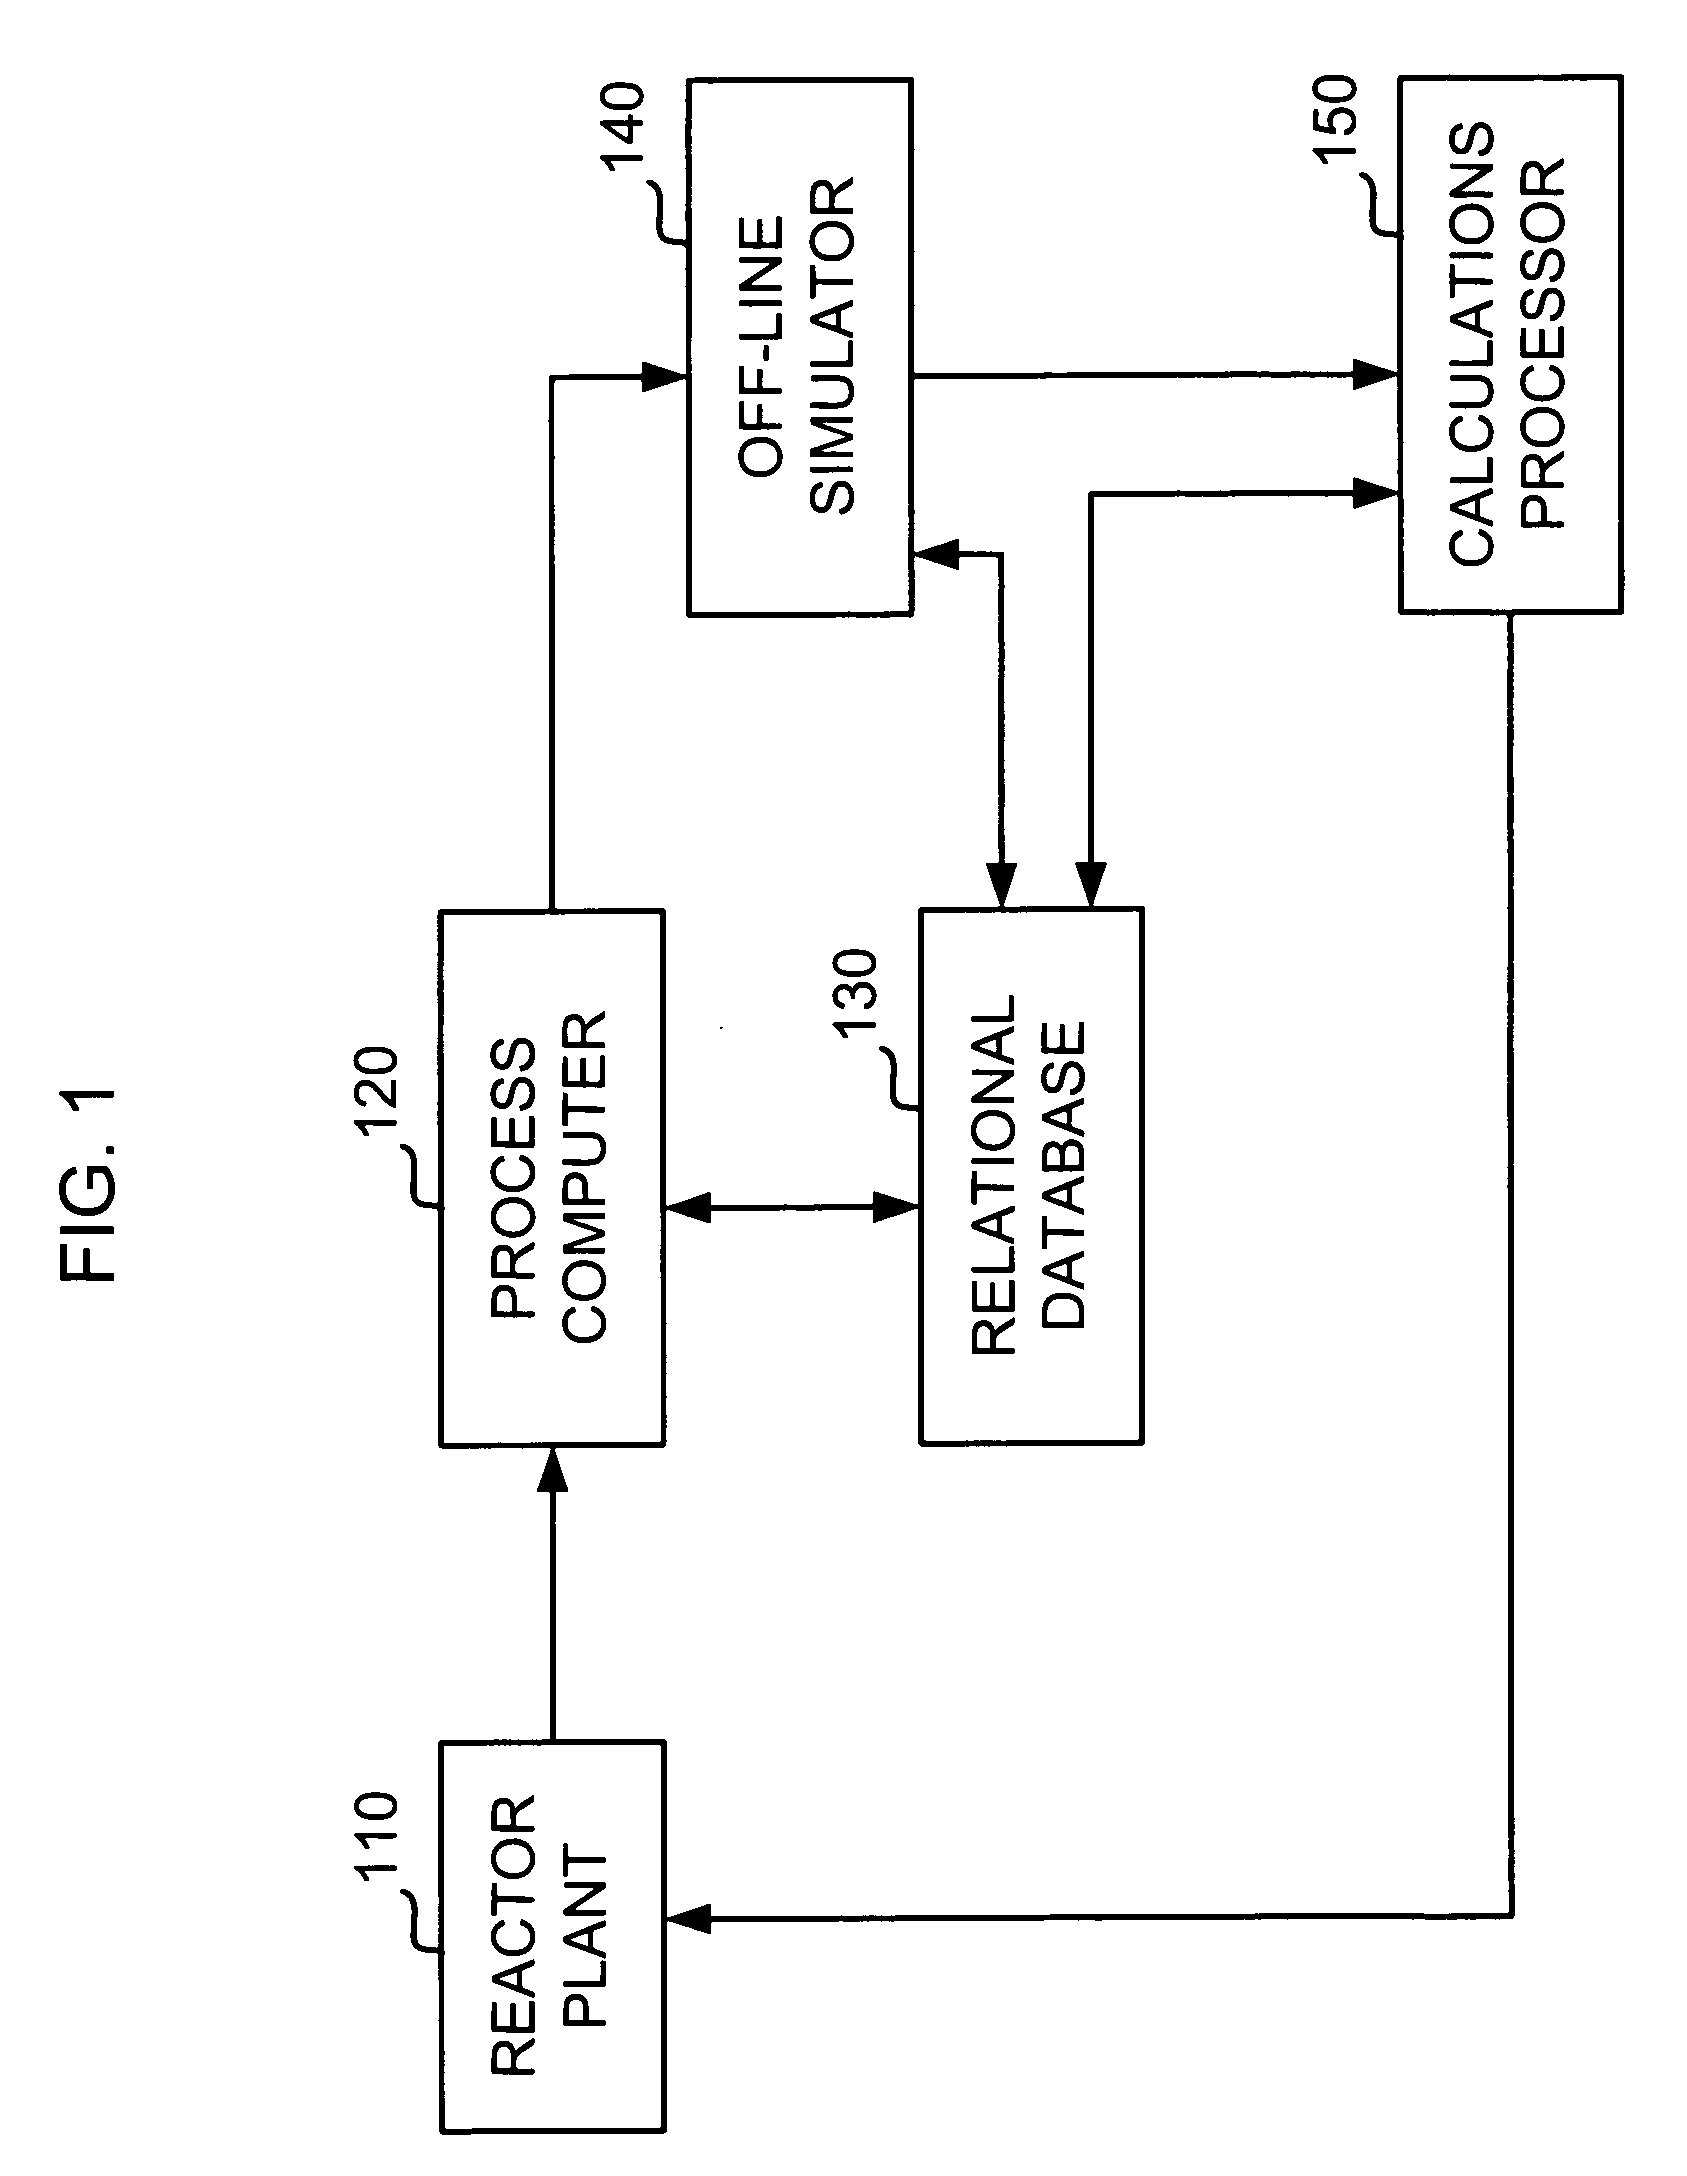 Method of determining margins to operating limits for nuclear reactor operation